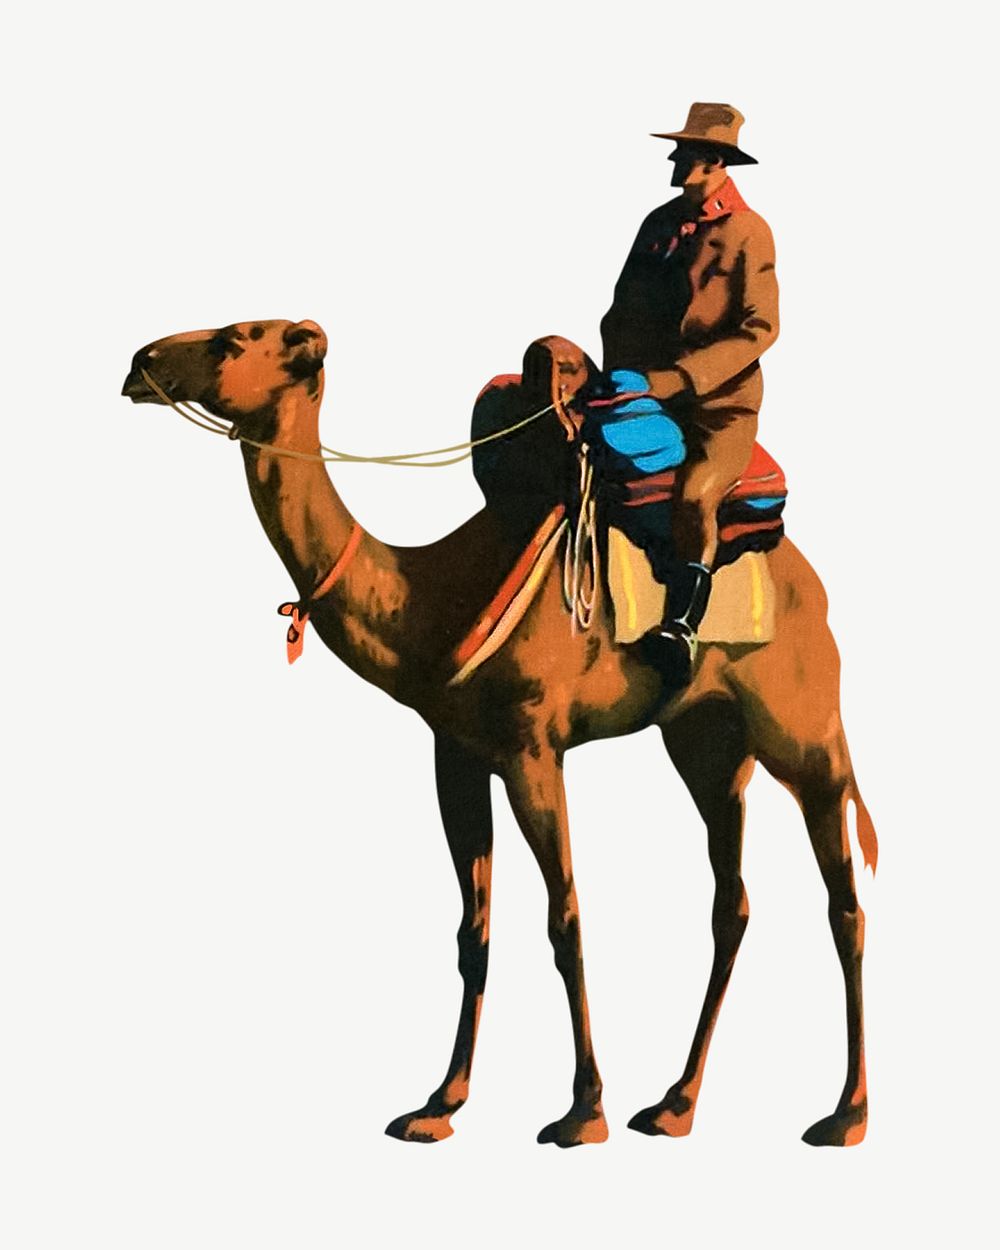 Vintage camel ride chromolithograph art psd. Remixed by rawpixel. 